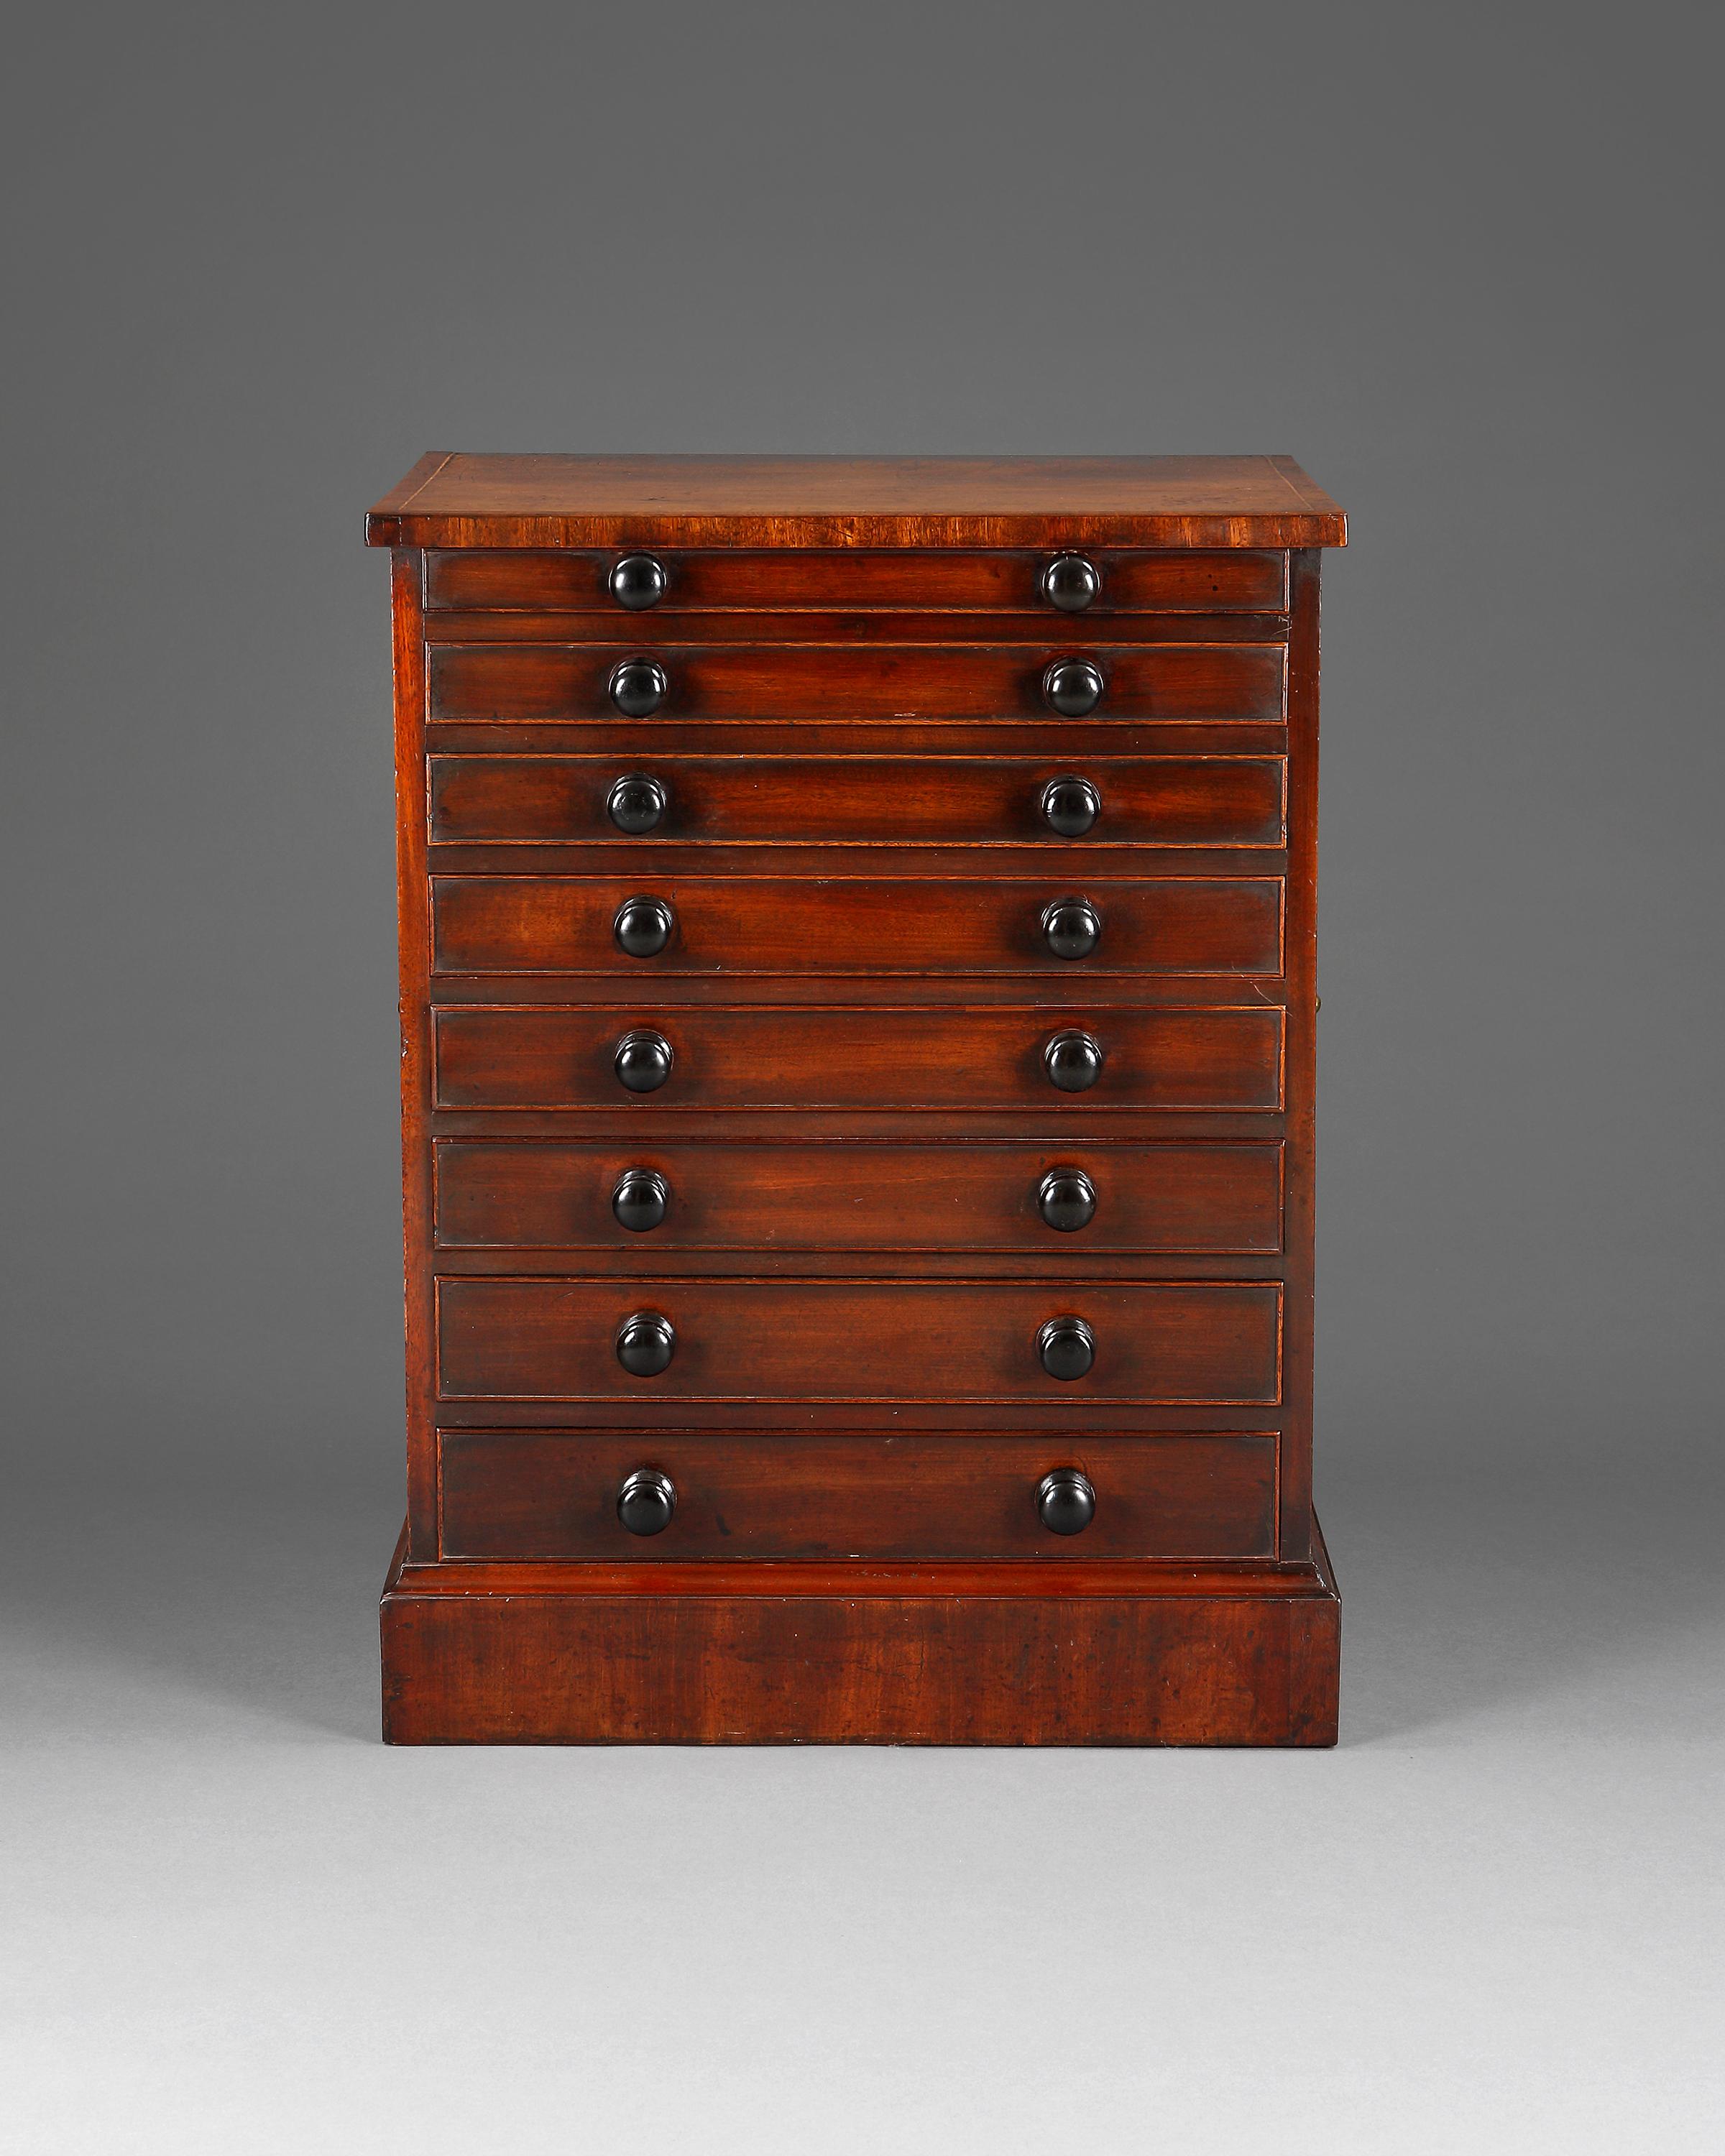 A very fine small George III period mahogany collectors chest with recently lined drawers in velvet. Having eight long graduated cock-beaded drawers and later turned ebony knob handles with original brass carrying handles. 
The whole is raised on a